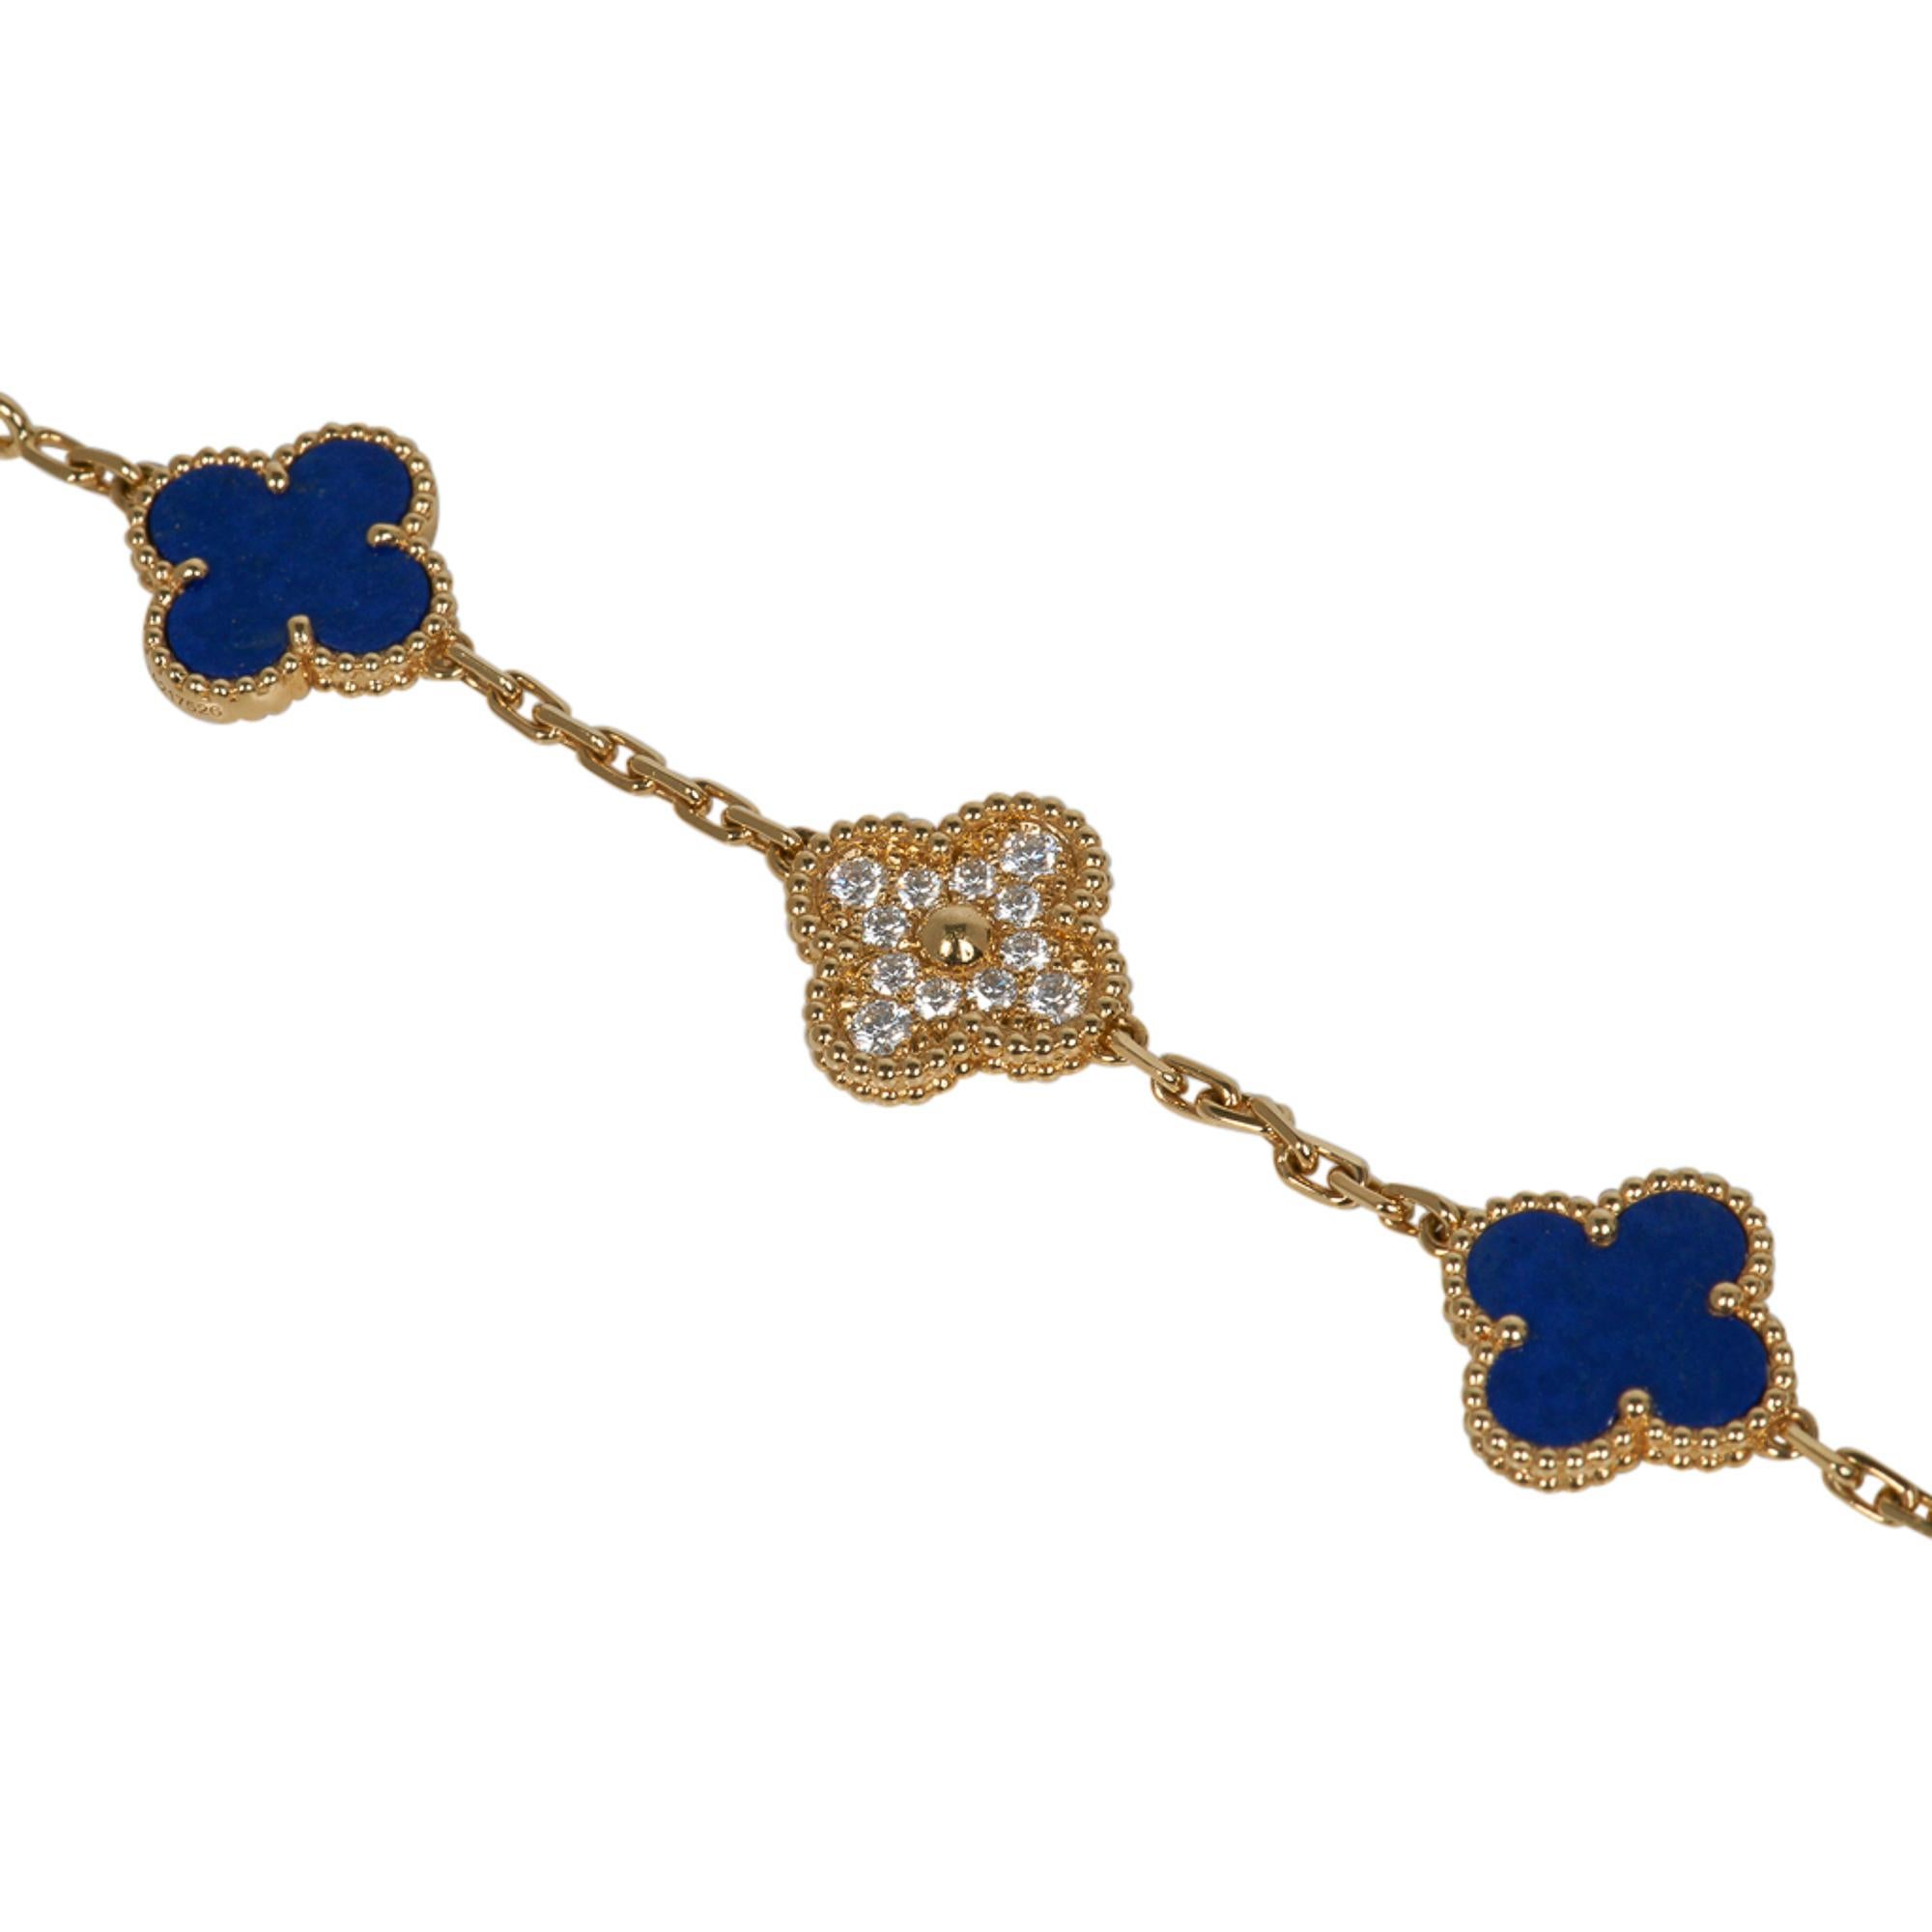 Guaranteed authentic Van Cleef and Arpels 50th anniversary 5 motif bracelet features Sweet Alhambra Lapis Lazuli and Diamond motifs set in 18K yellow gold.
Very rare to find, this beauty is a collectors treasure.
Signature stamps on bracelet.
Comes